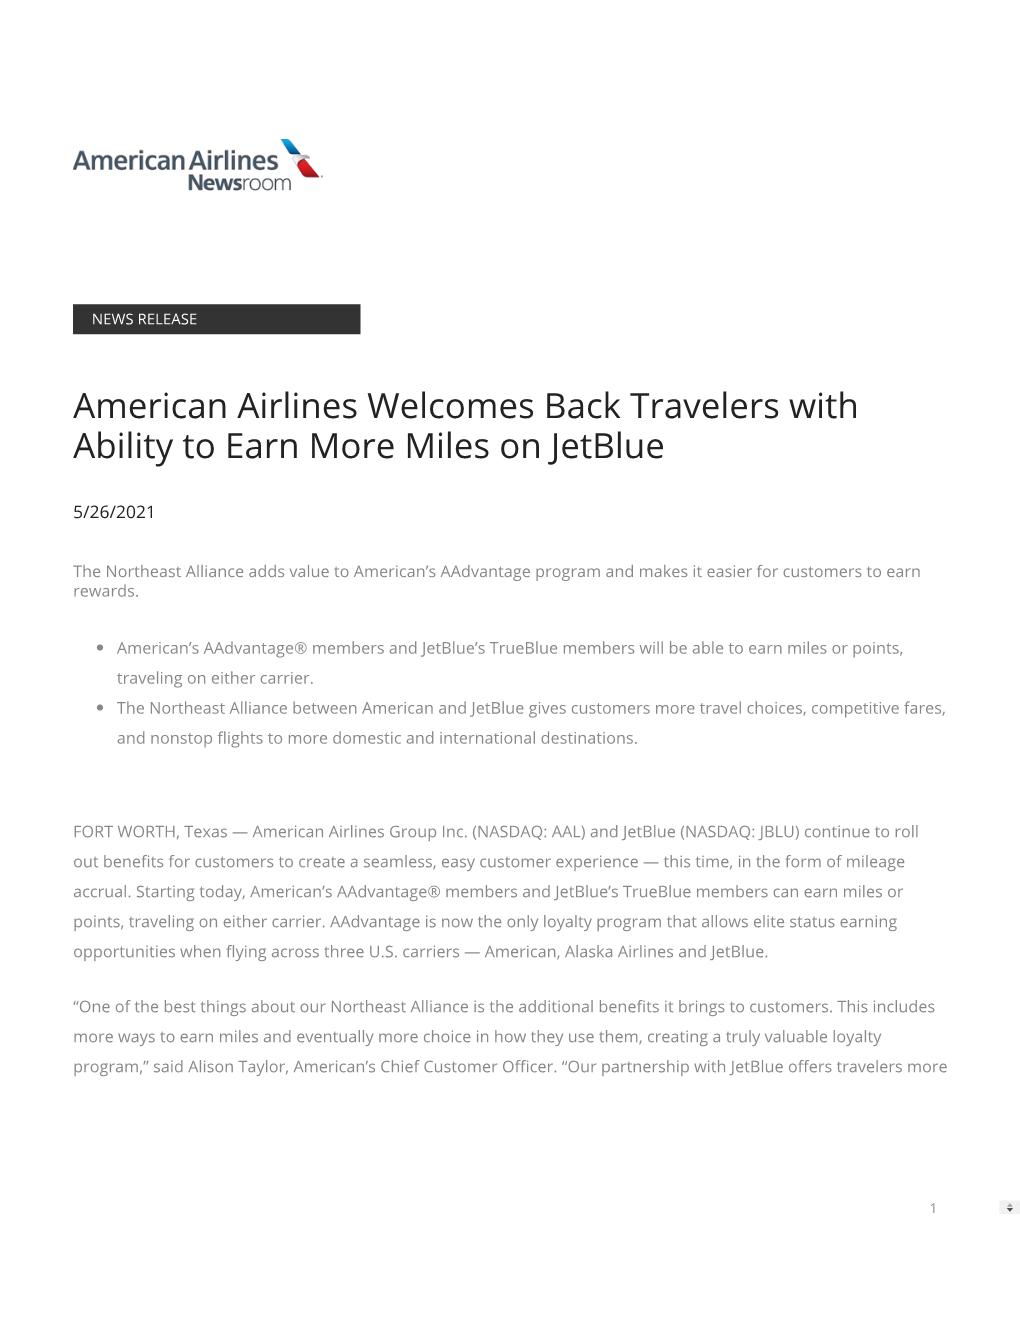 American Airlines Welcomes Back Travelers with Ability to Earn More Miles on Jetblue